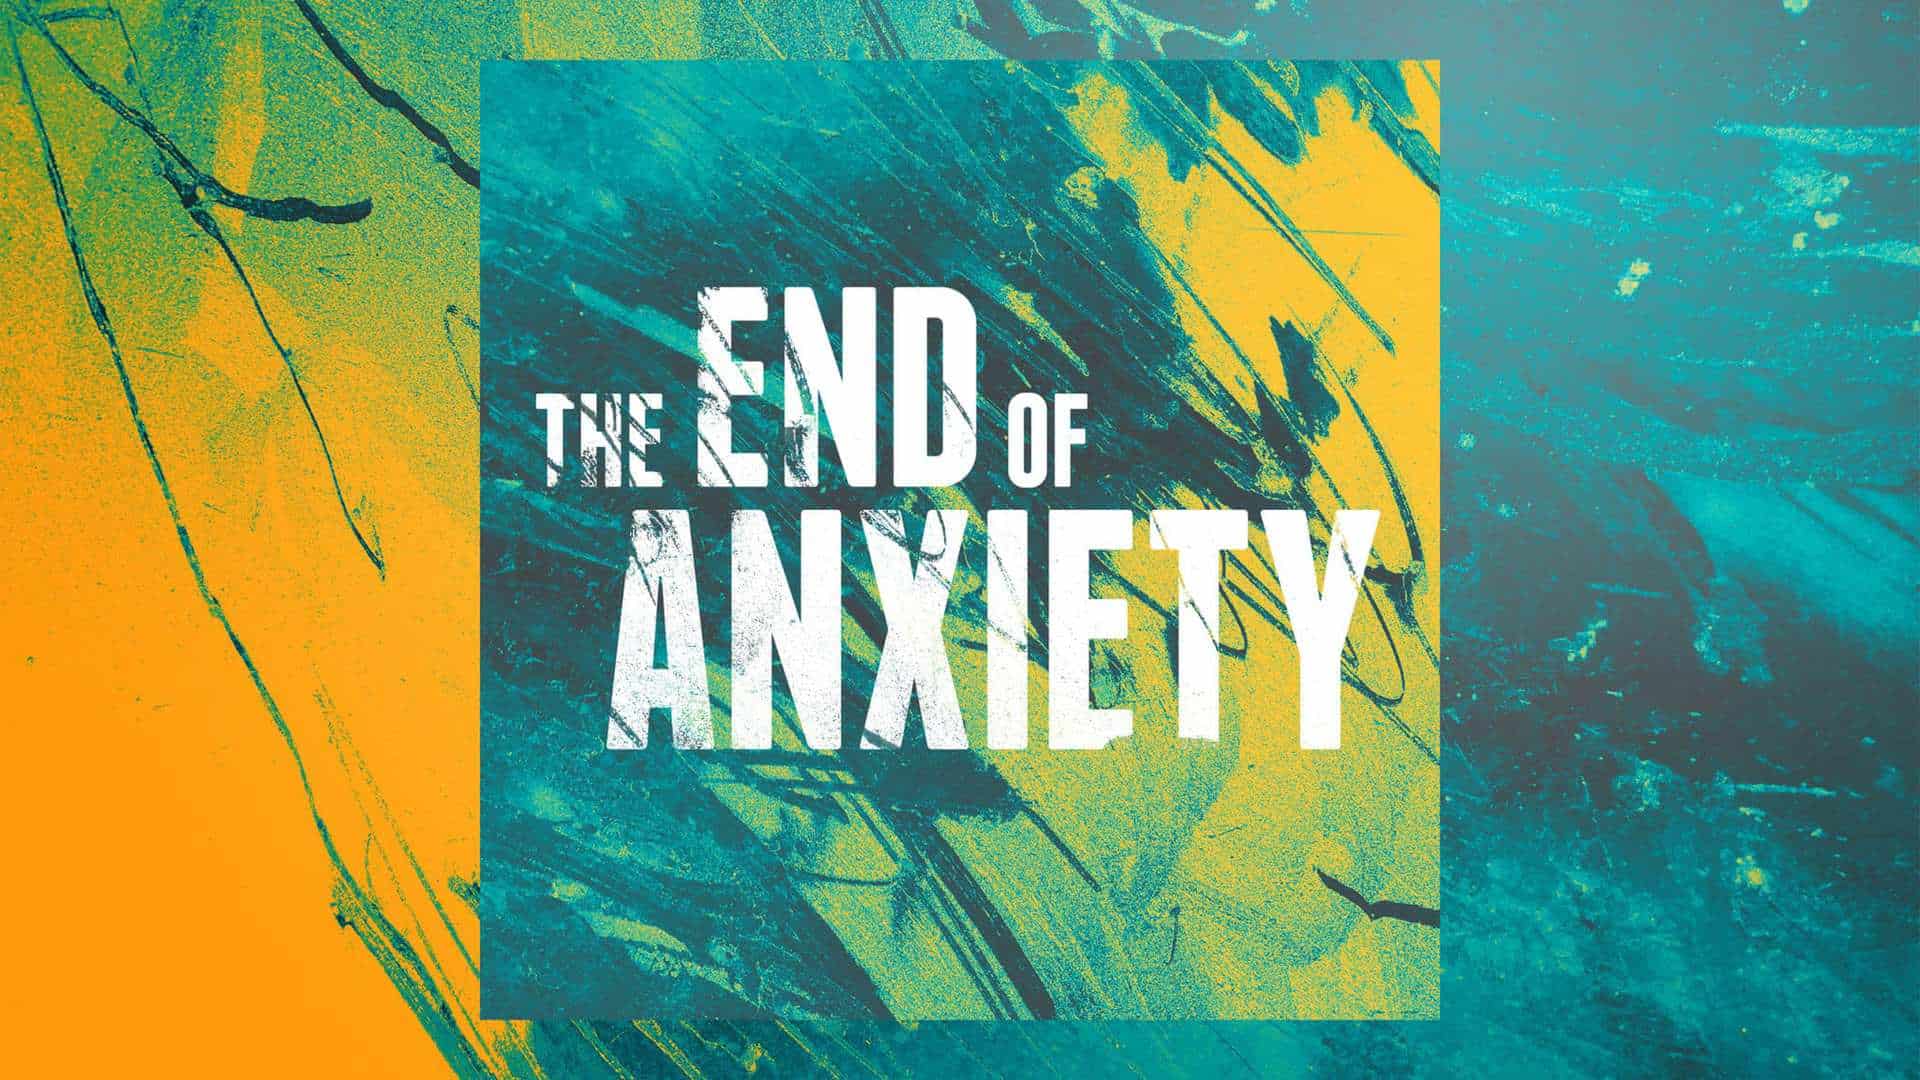 The end of anxiety: Stand firm in the face of fear - 7/26/20